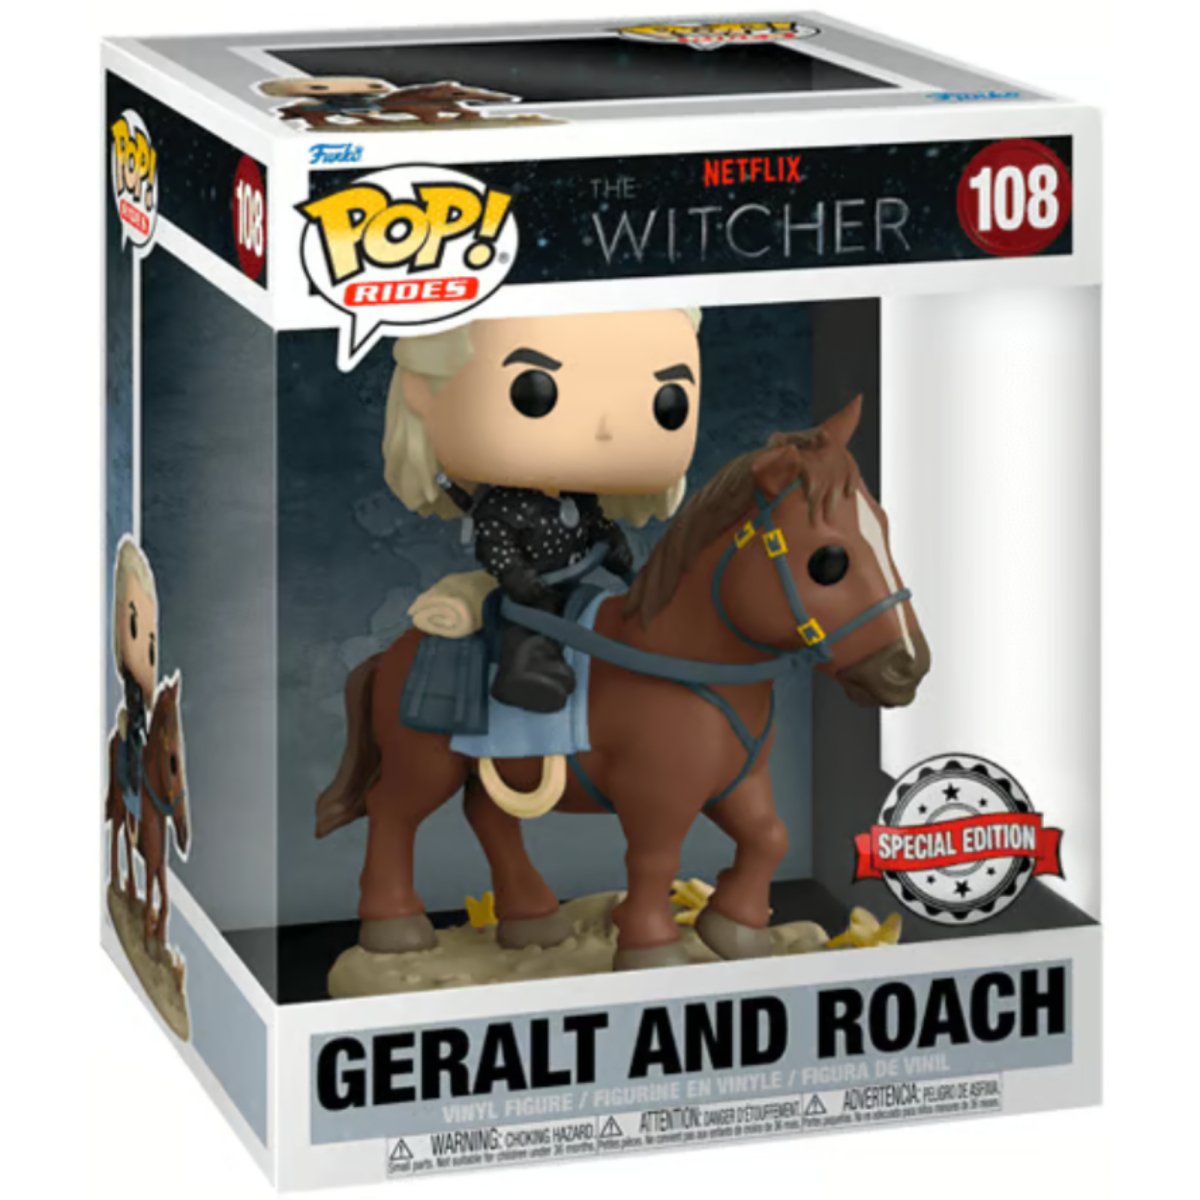 The Witcher - 6" Geralt and Roach (Special Edition) #108 - Funko Pop! Vinyl Television - Persona Toys